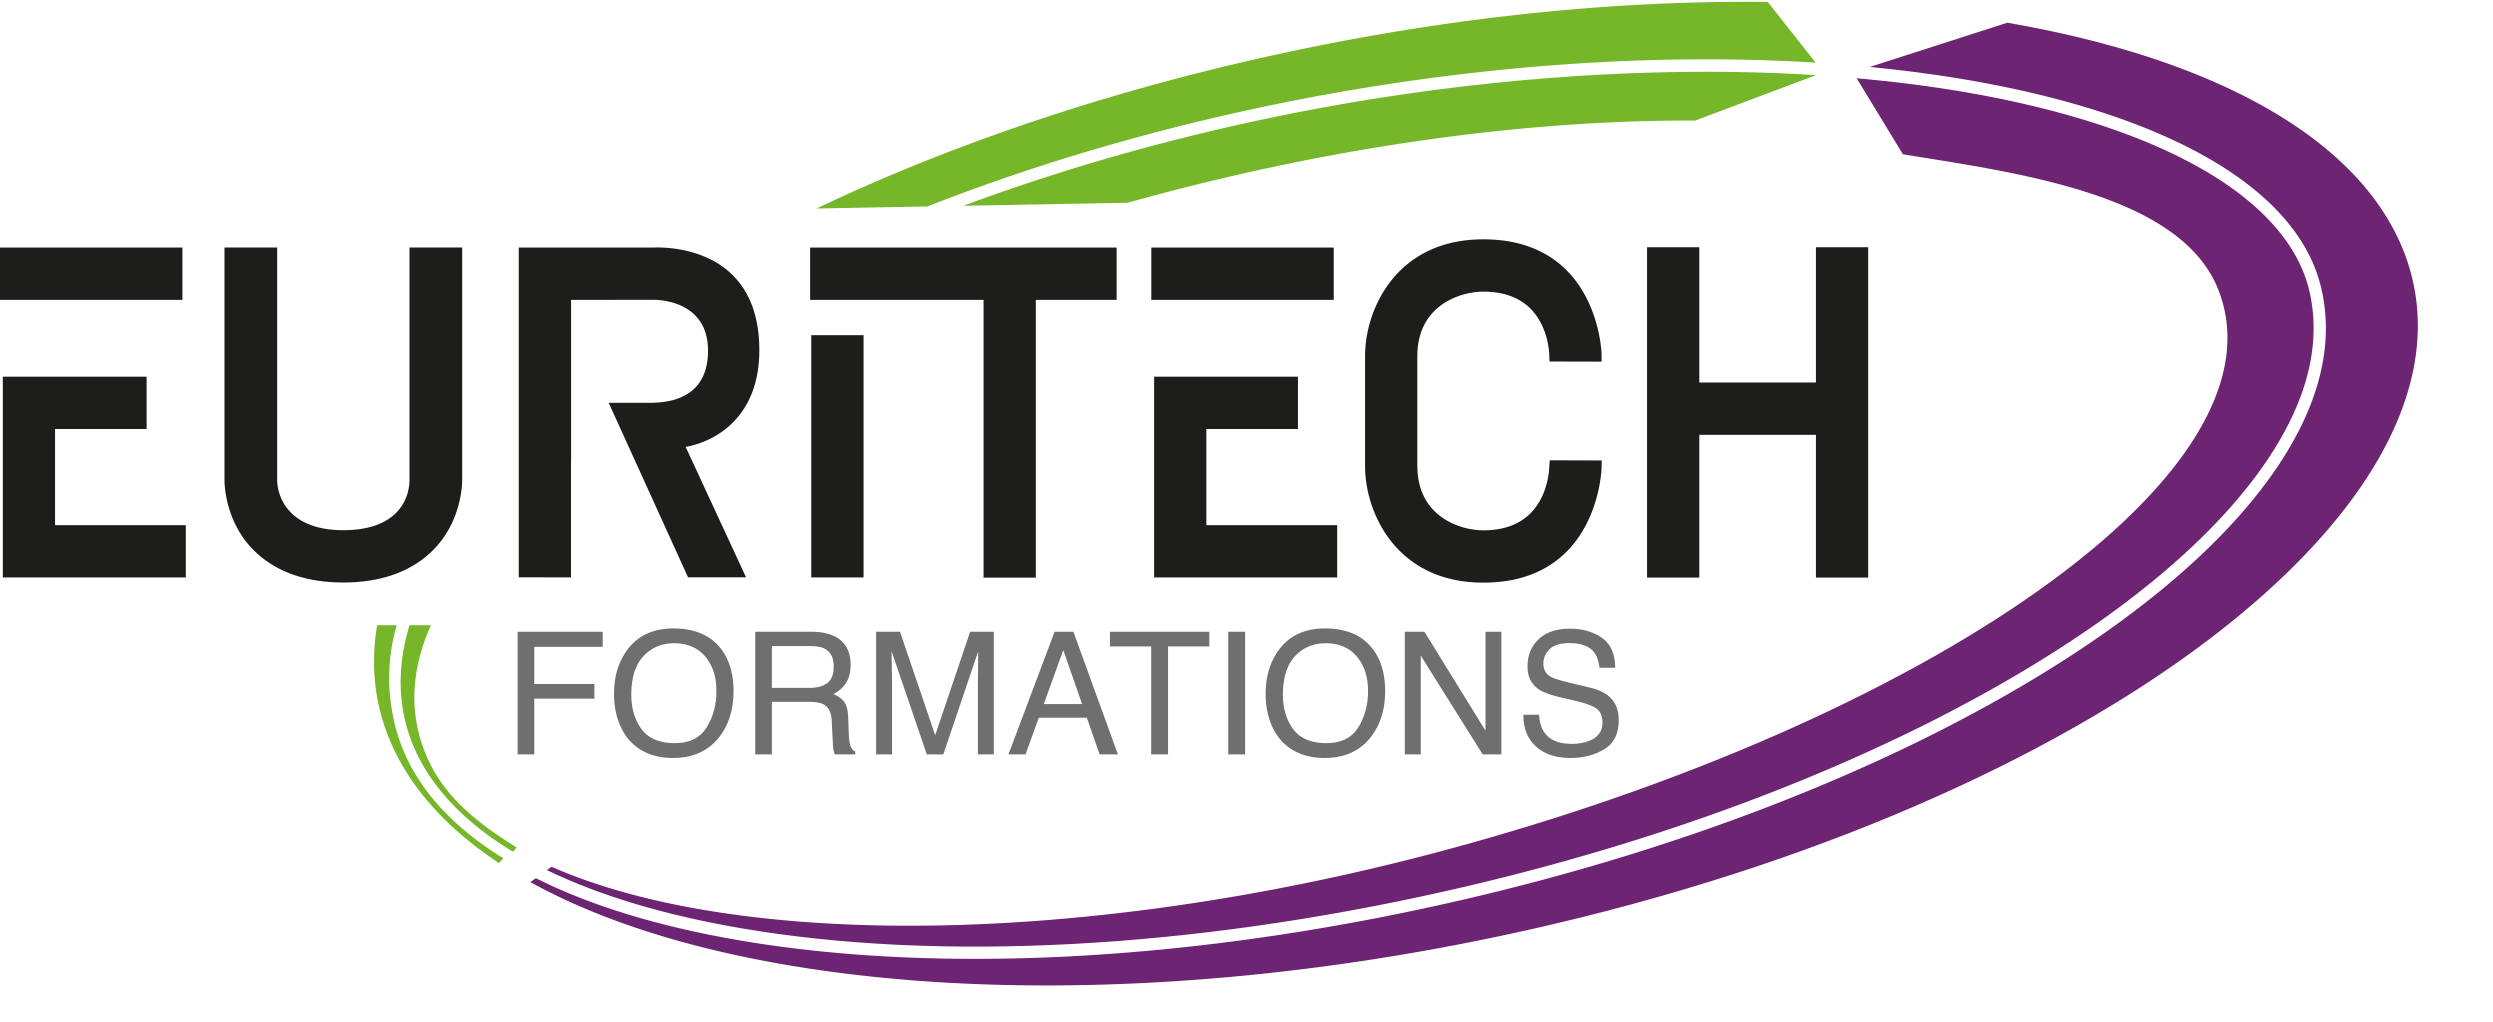 Euritech-Formations